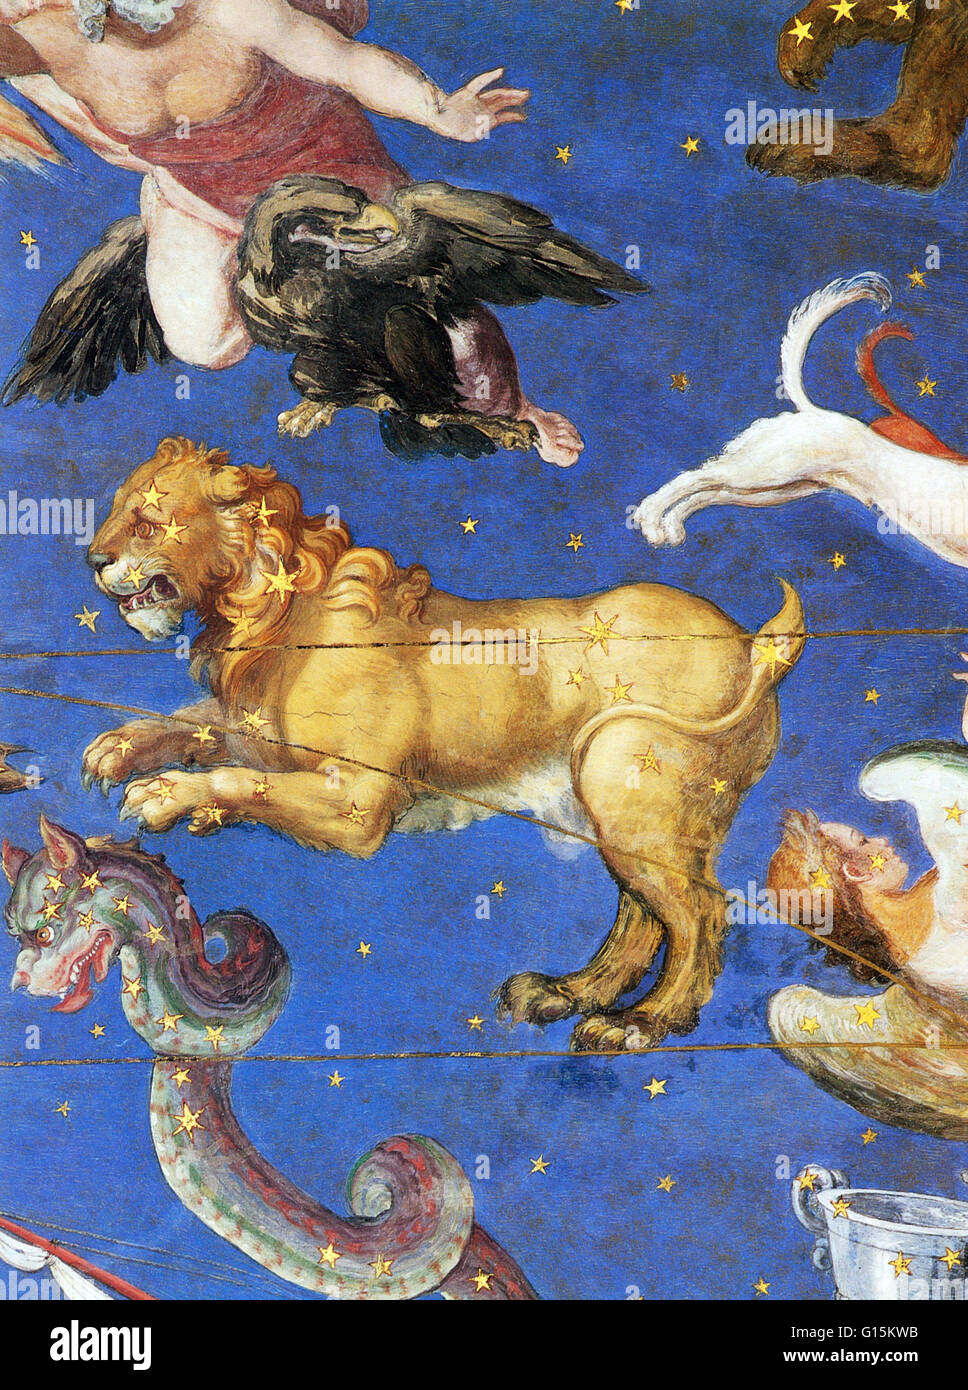 Leo constellation on the ceiling in the Villa Farnese, Caprarola, Italy painted in 1575. Leo is one of the constellations of the zodiac, lying between Cancer to the west and Virgo to the east. Its name is Latin for lion. One of the 48 constellations descr Stock Photo